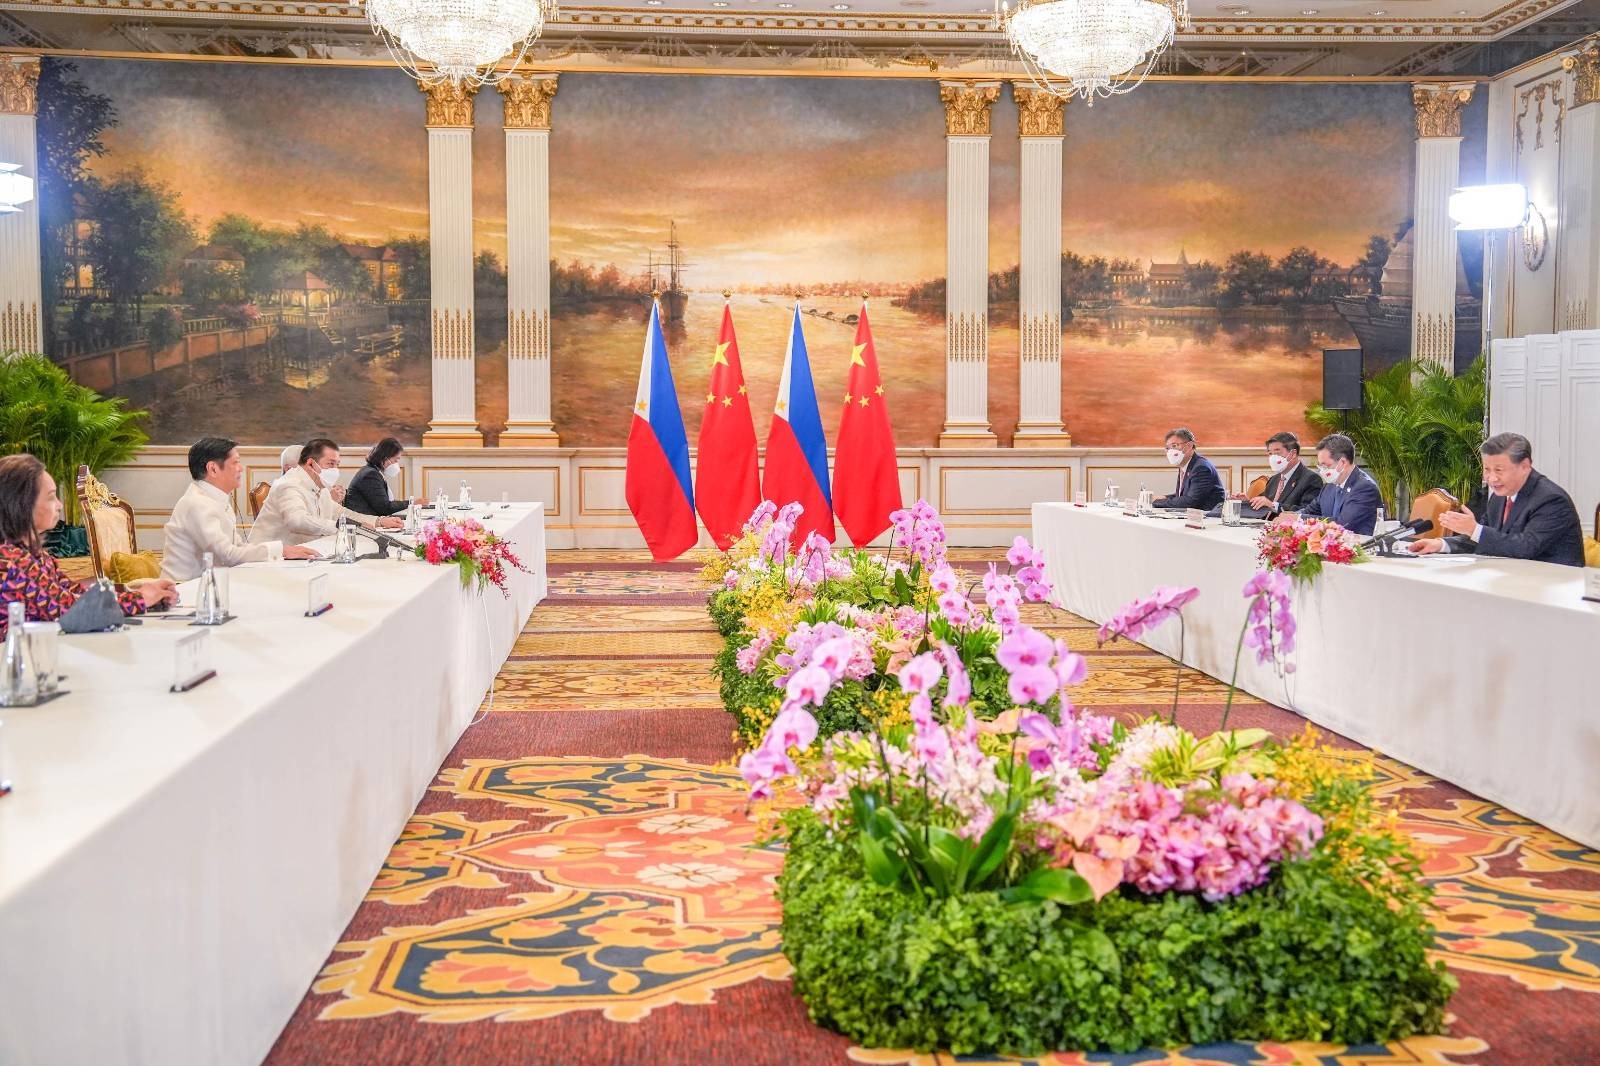 Bilateral meeting with President Xi Jinping in Thailand